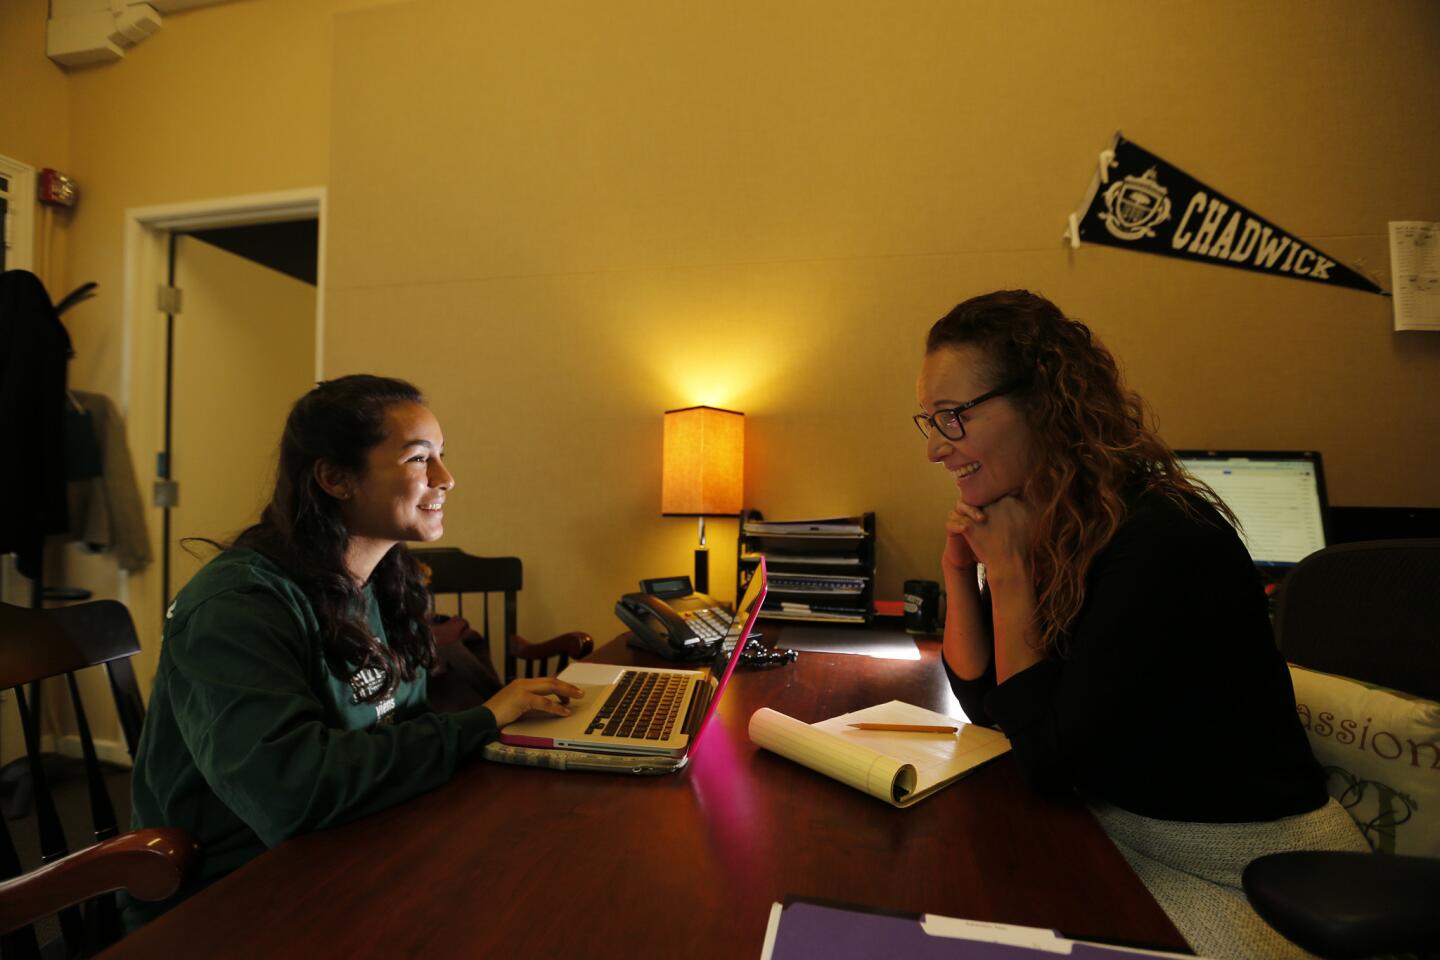 Lizbeth Ledesma talks college plans with counselor Alicia Valencia Akers at Chadwick School on the Palos Verdes Peninsula.